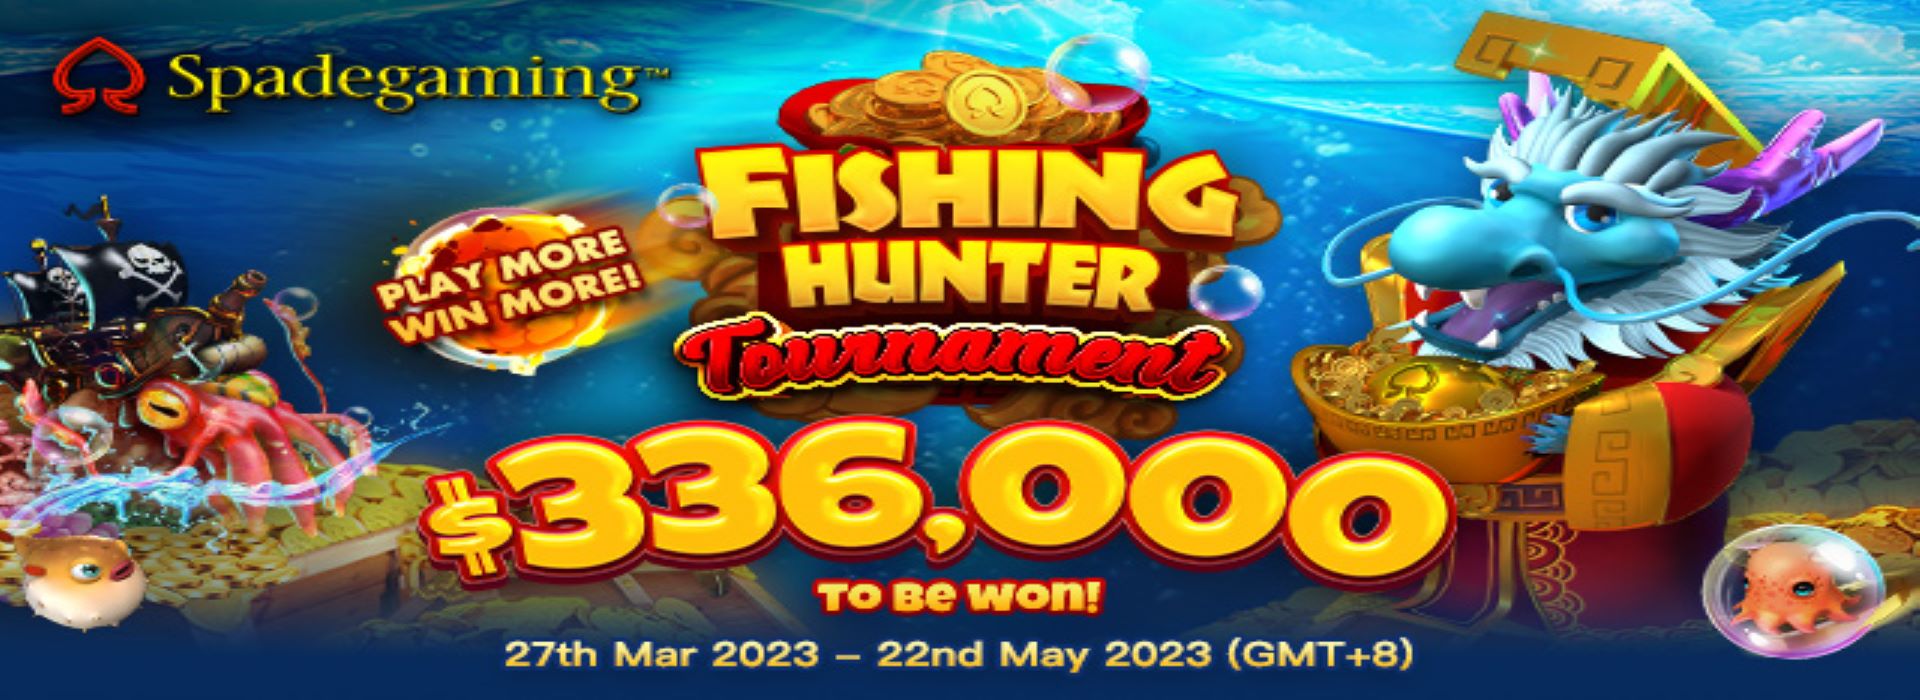 Spadegaming’s Grand Fishing Hunter Tournament! Play More! Win More!!Total Cash Prize Up to $336,000